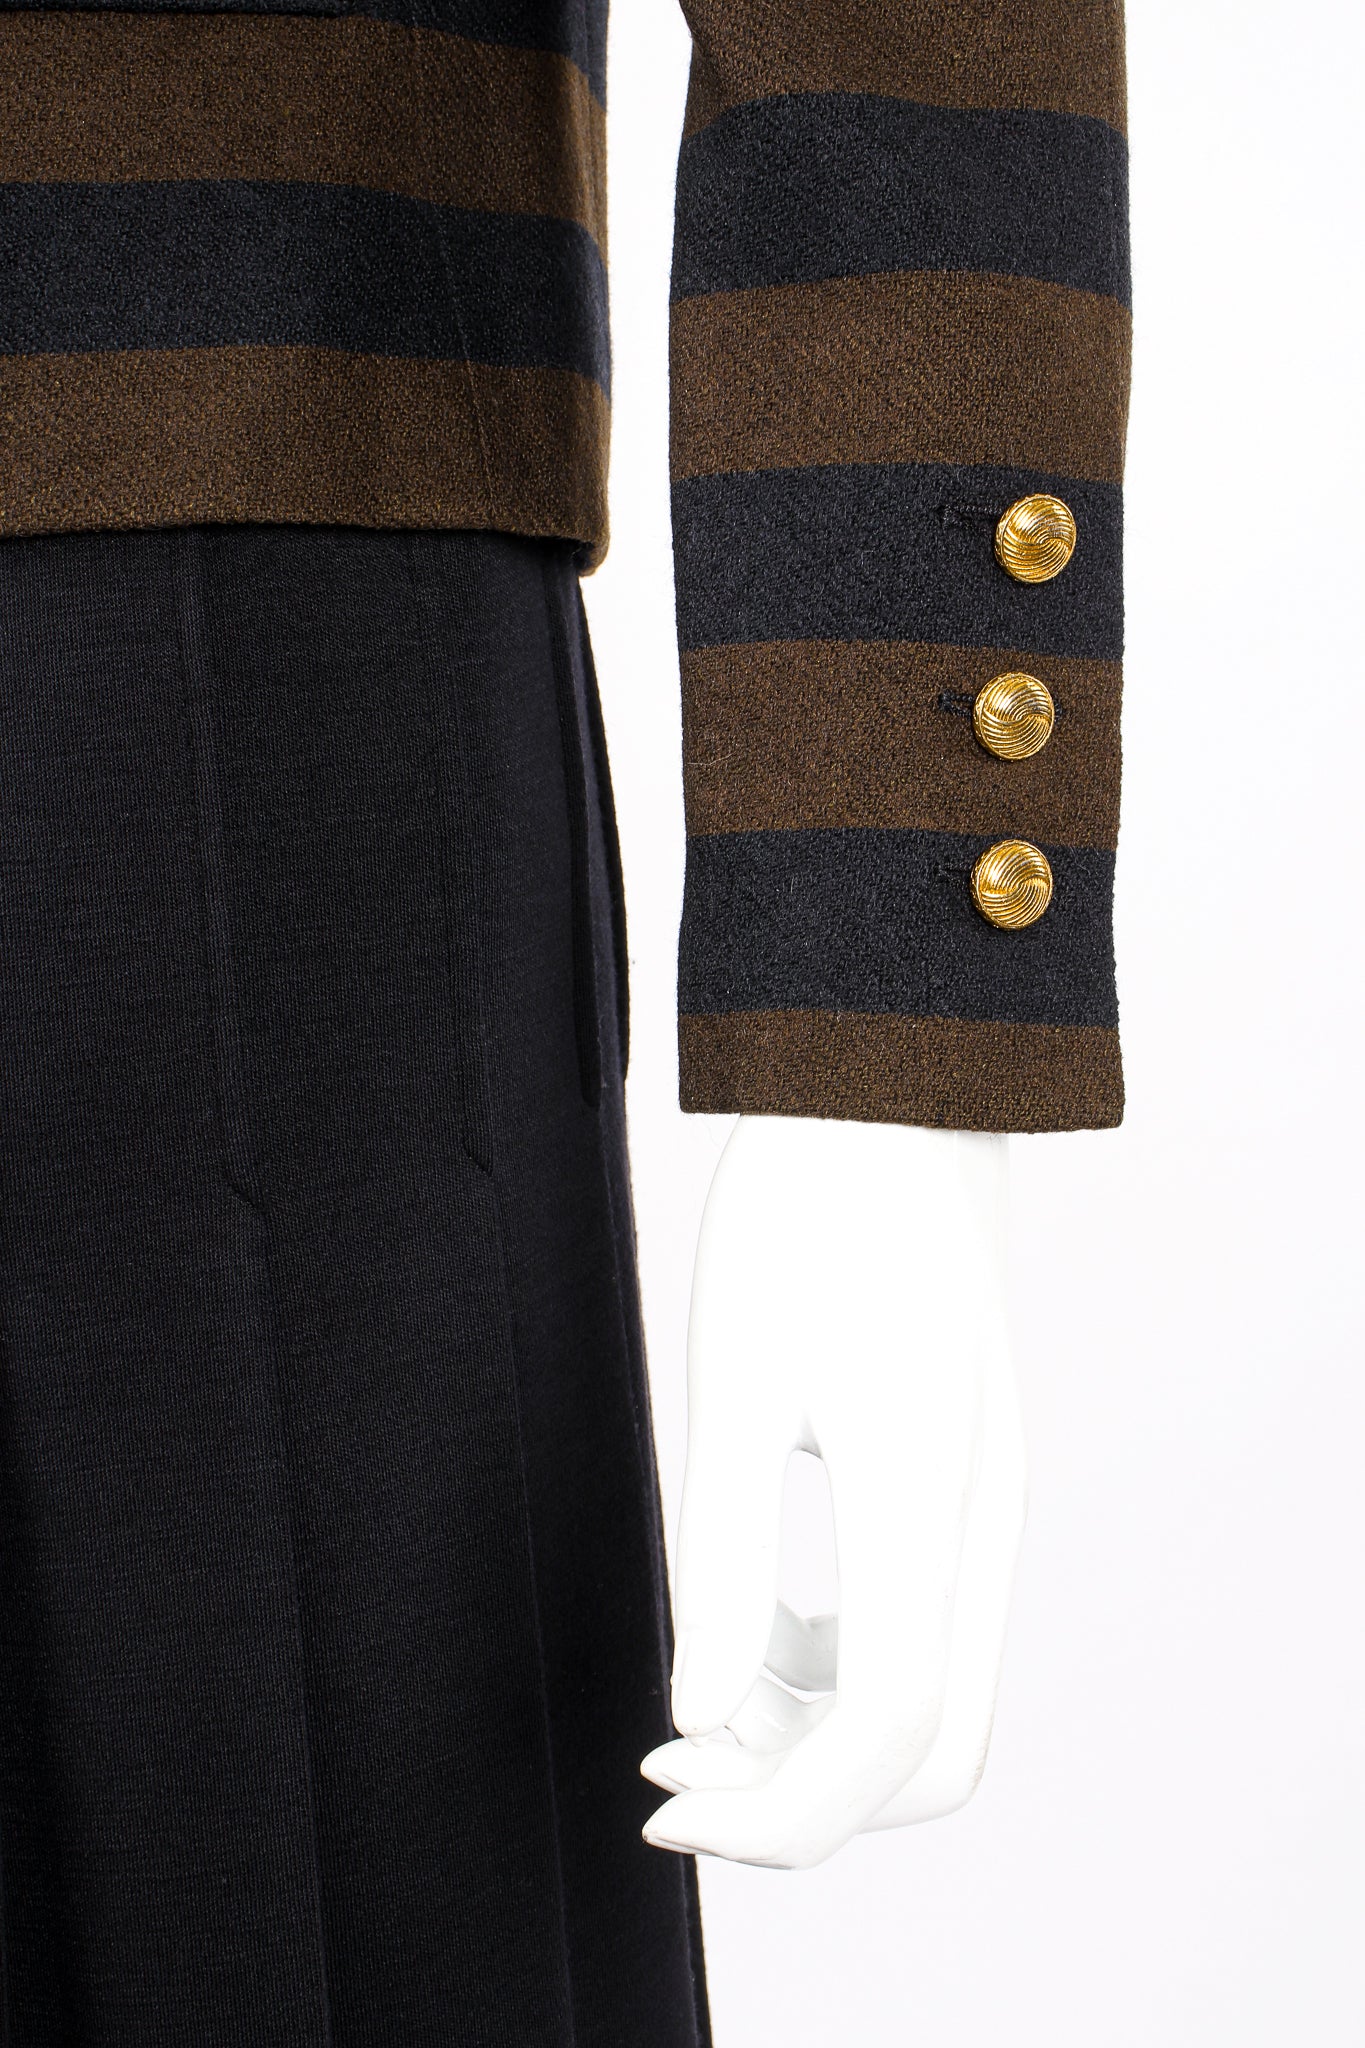 Vintage Chanel Striped Boxy Jacket & Skirt Set on Mannequin sleeve at Recess Los Angeles